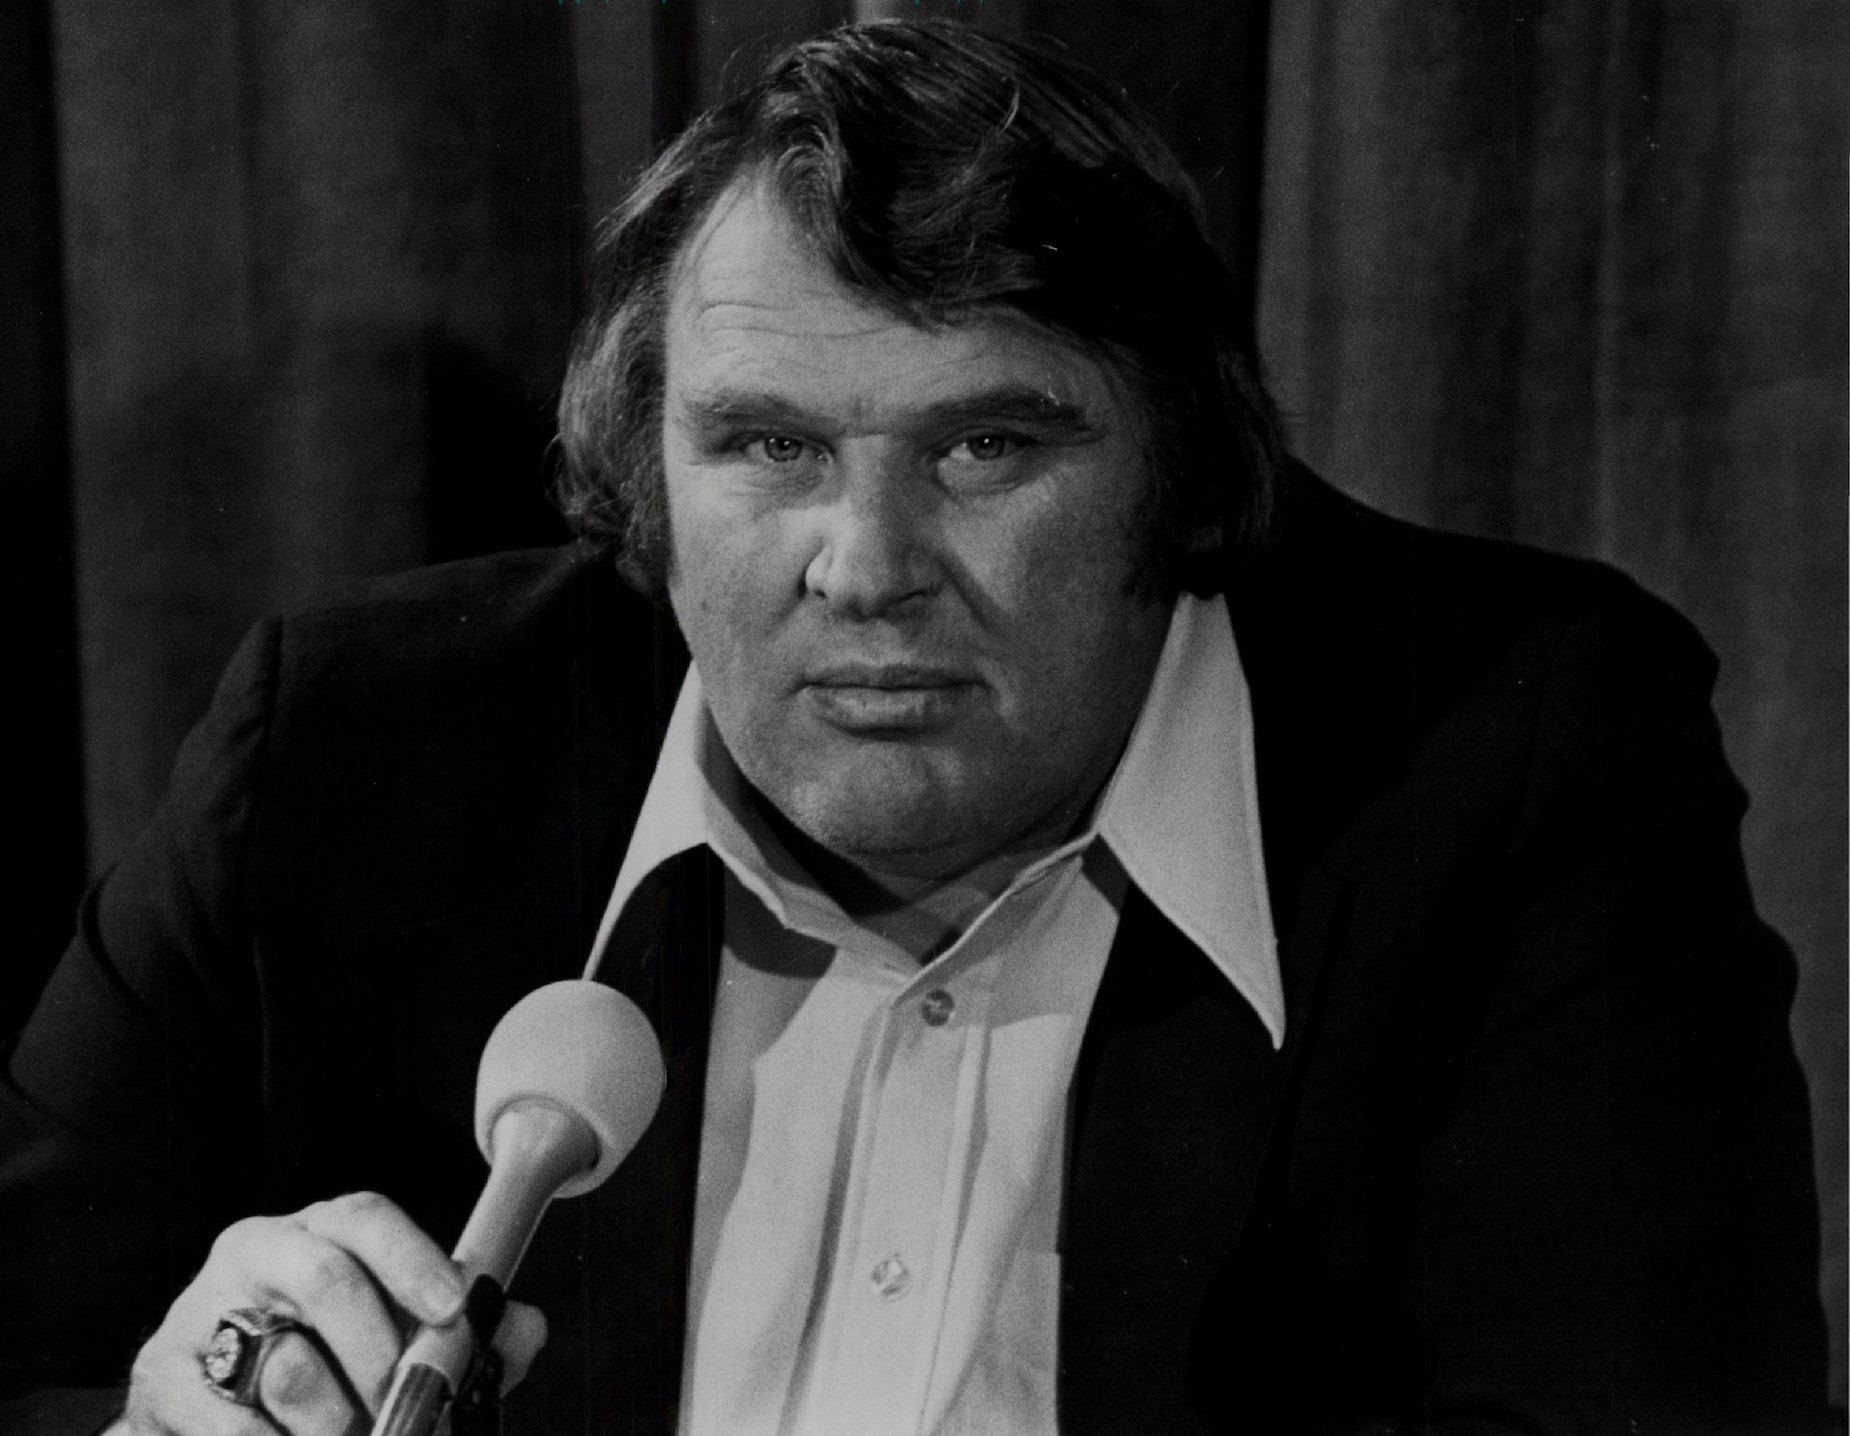 John Madden Reduced Lester Hayes to Tears With a Single Coaching Decision  Before Transforming Him Into the Defensive Player of the Year